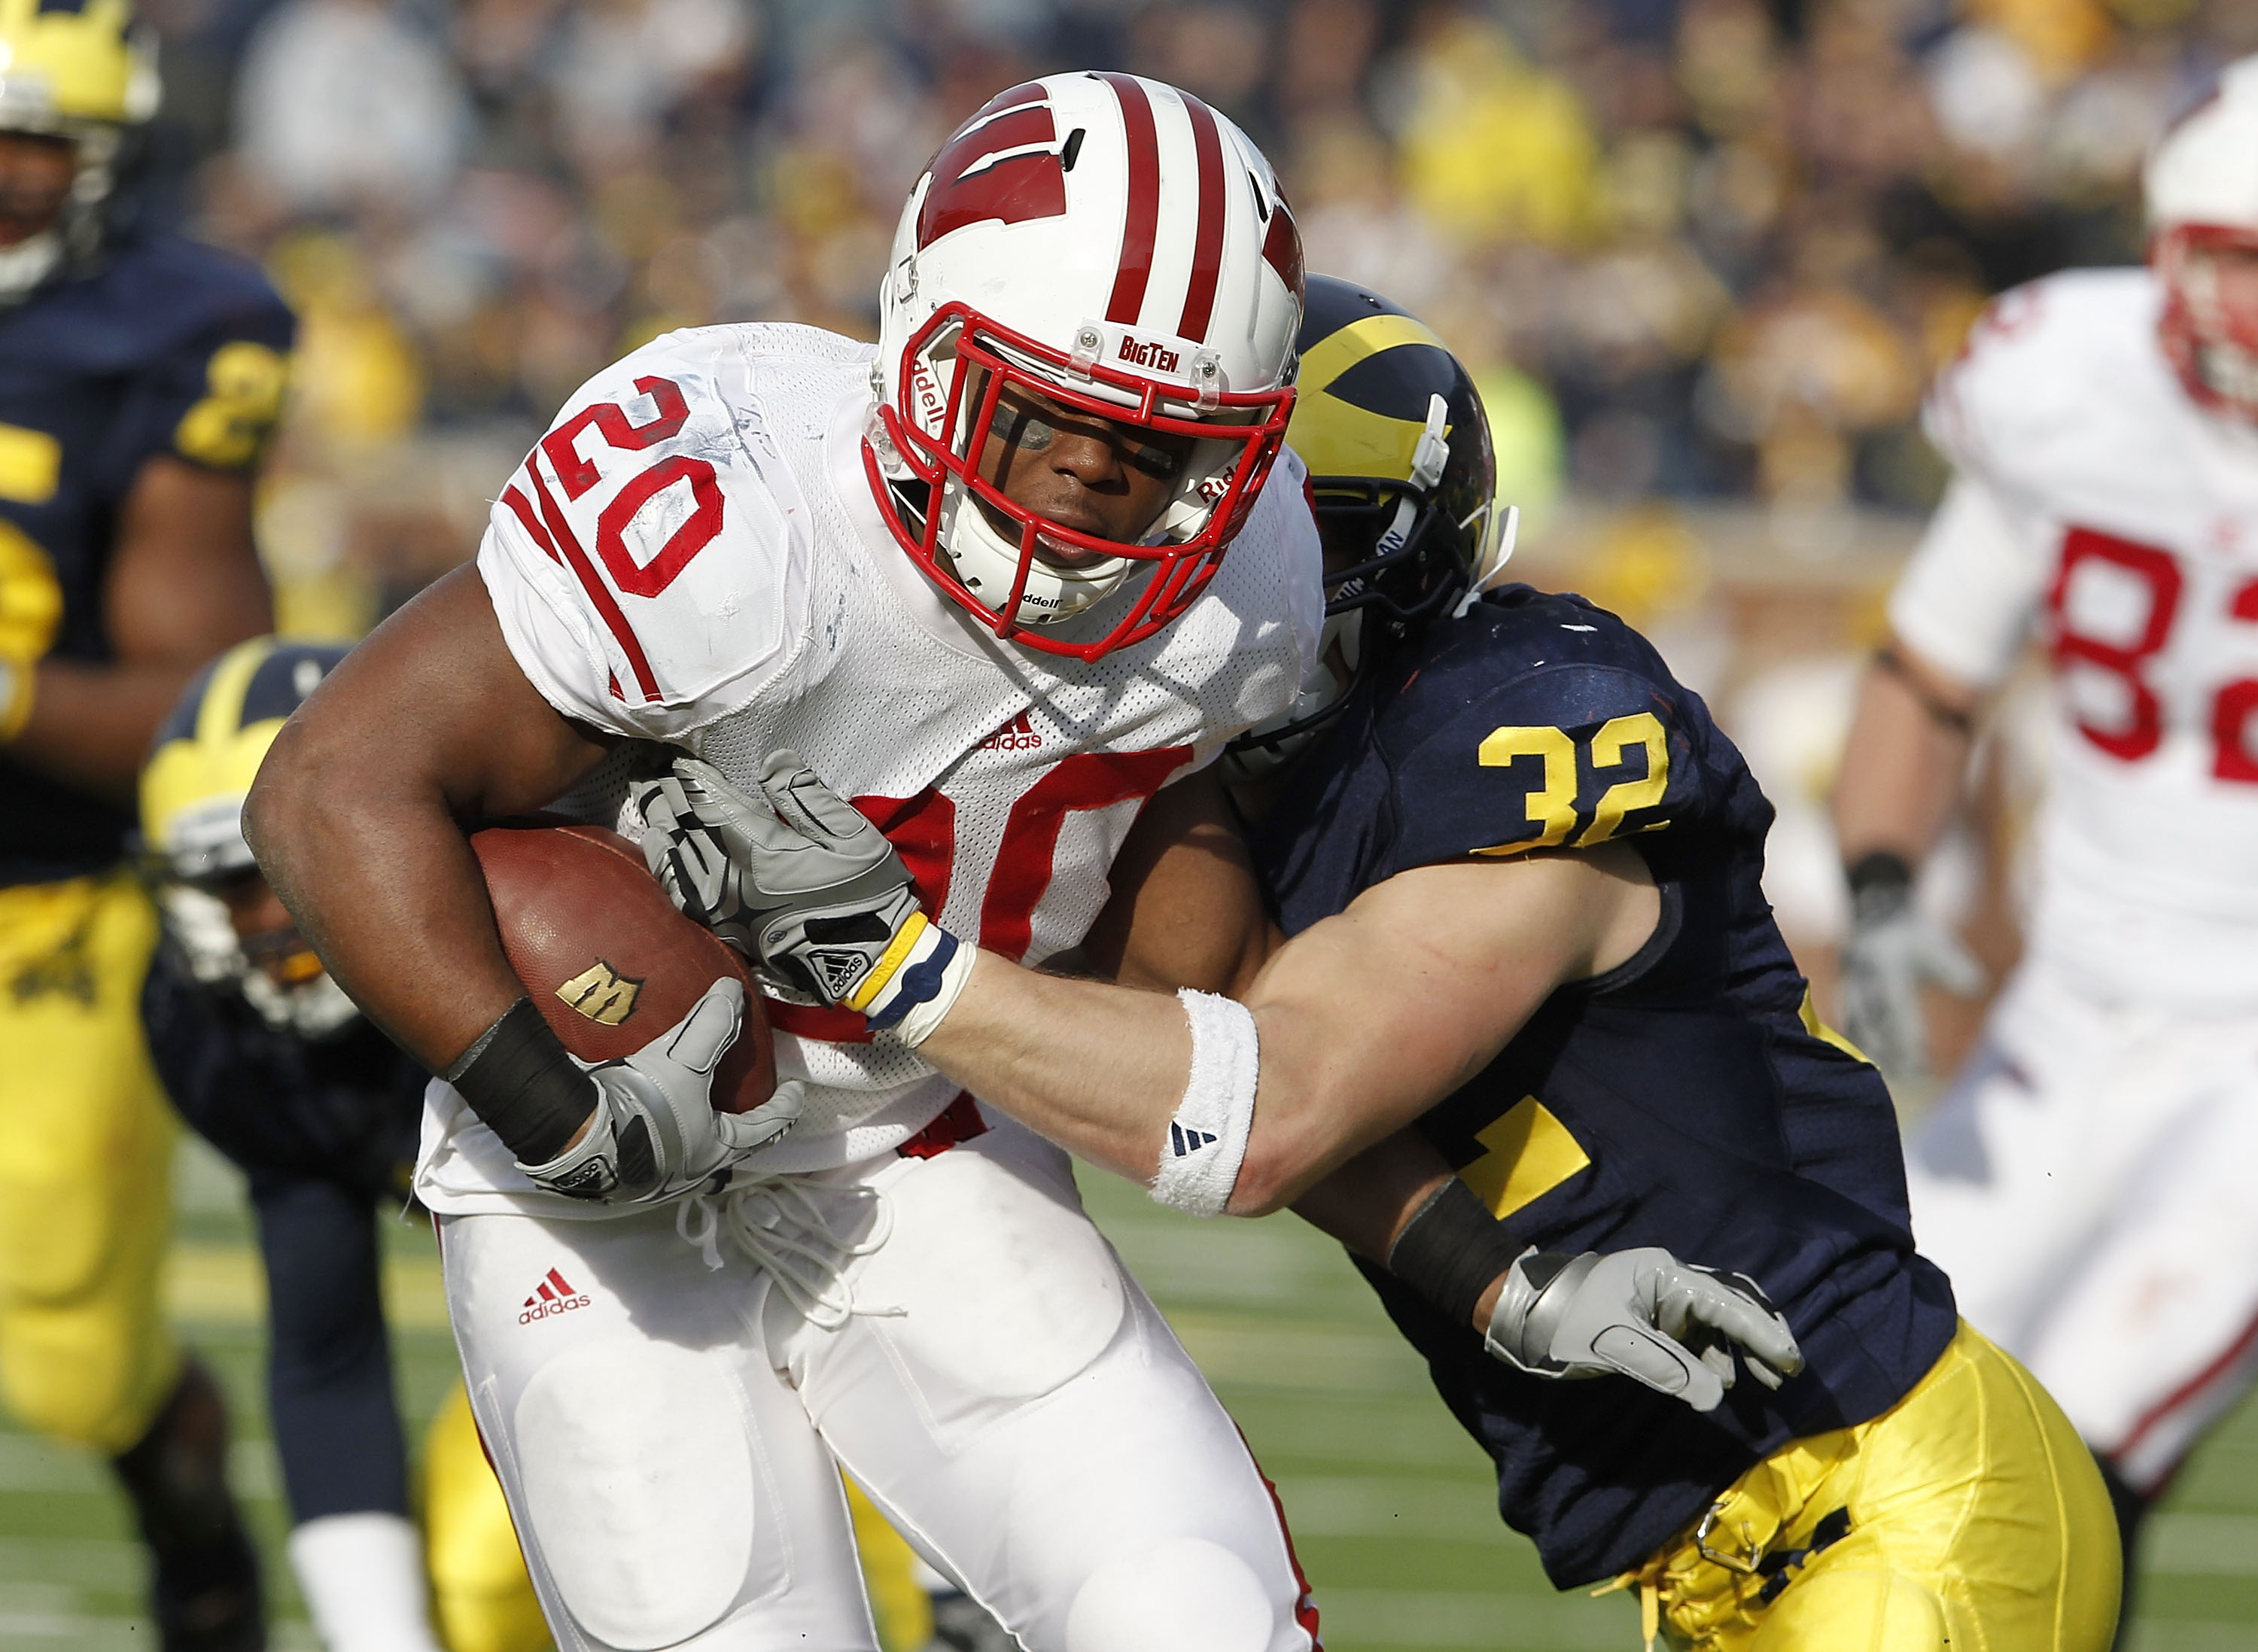 ANN ARBOR, MI - NOVEMBER 20:  James White #20 of the Wisconsin Badgers treies to get around the tackle of Jordan Kovacs #32 of the Michigan Wolverines at Michigan Stadium on November 20, 2010 in Ann Arbor, Michigan. Wisconson won the game 48-28.  (Photo b